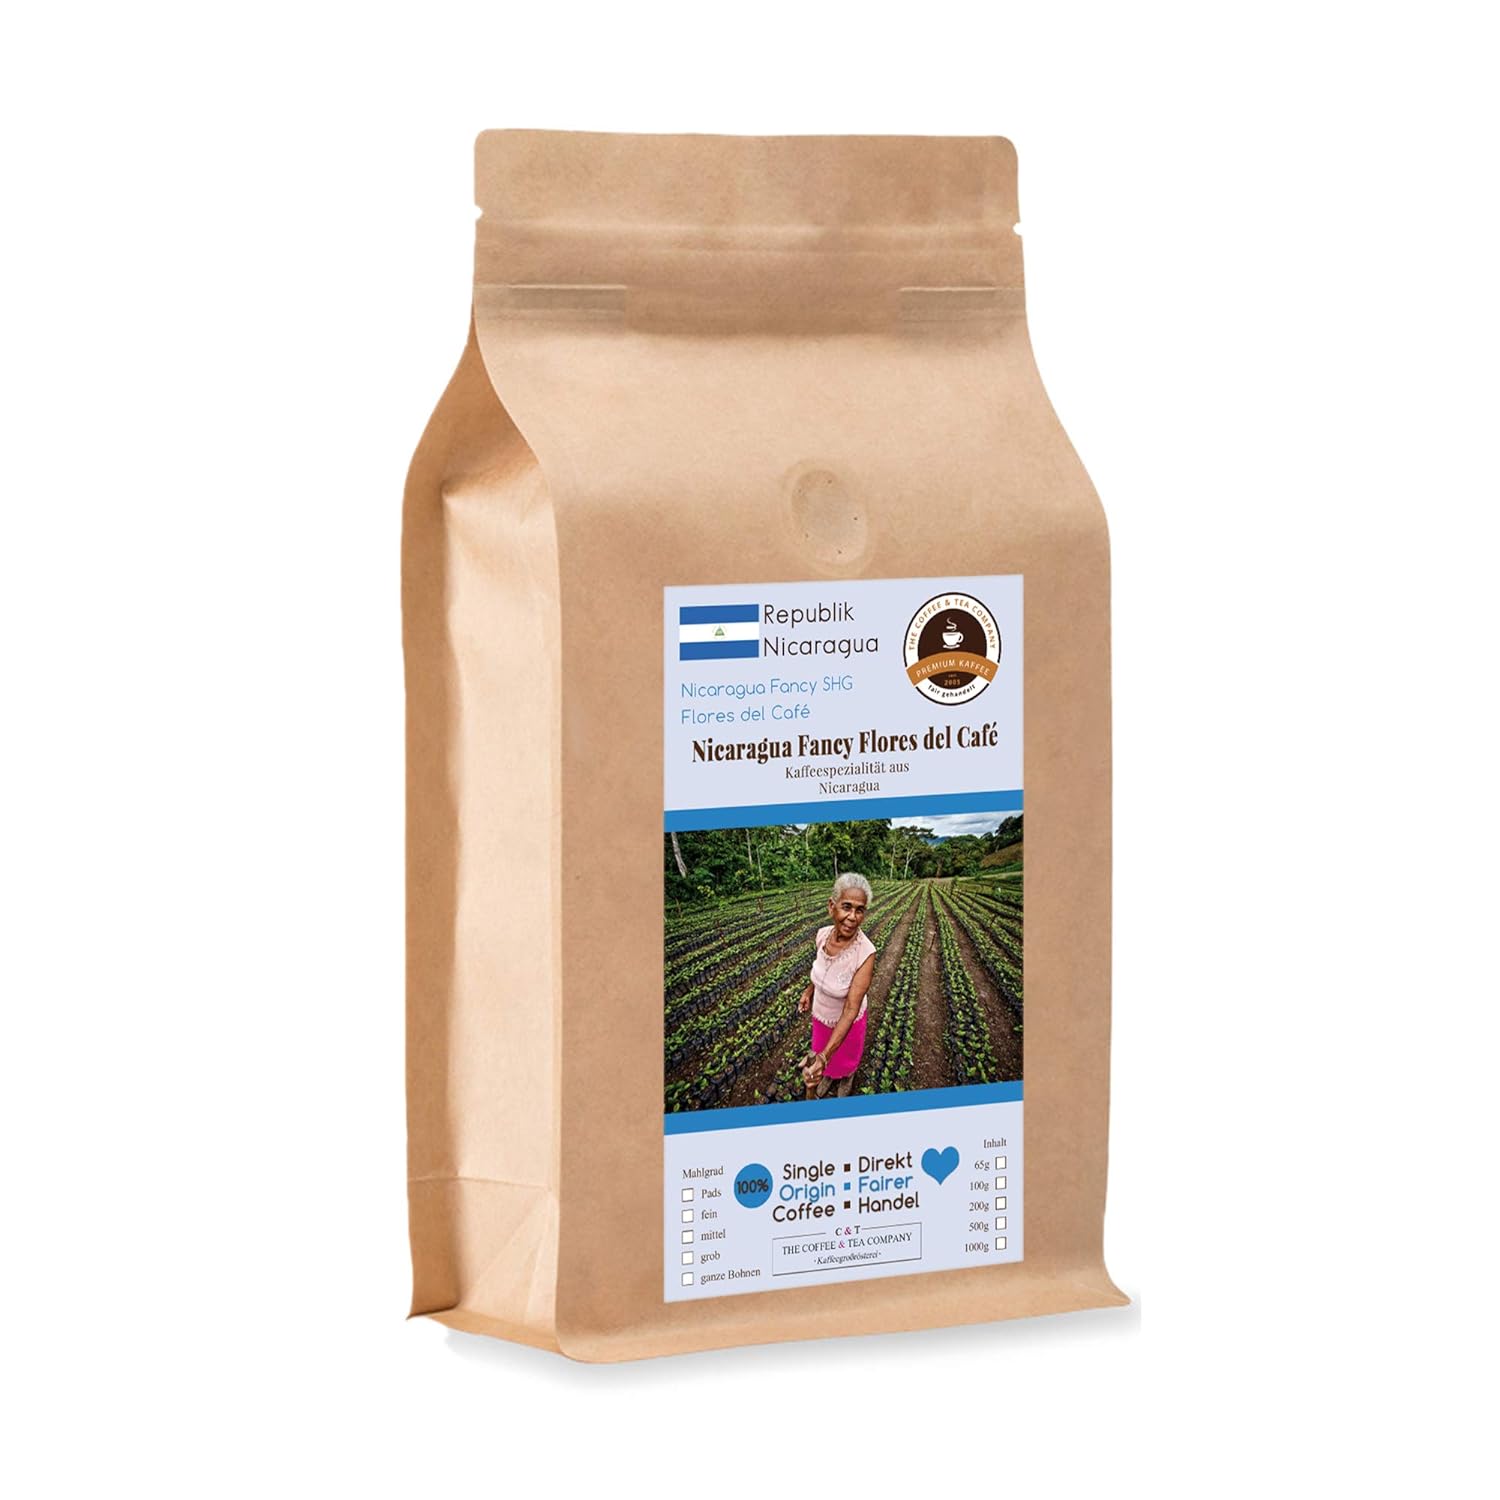 Coffee Globetrotter - Coffee with Heart - Nicaragua Fancy Flores del Café - 1000g Whole Bean - Top Coffee from the Women\'s Fund Project Fair Trade Supports Social Projects